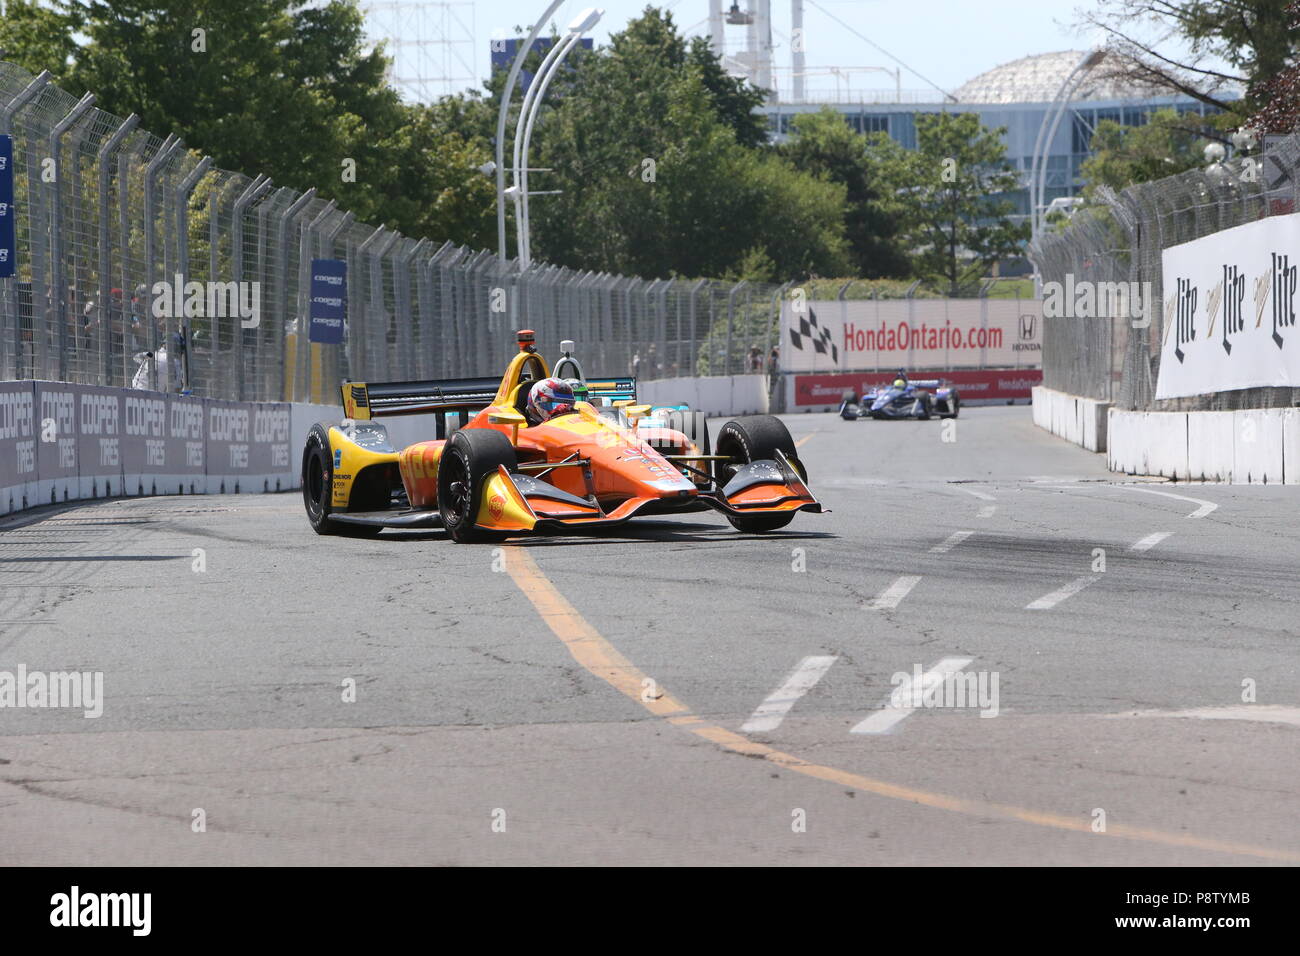 Toronto, Canada. 13th July 2018. The green flag is out as the practice is underway at Honda Indy festivities in Toronto Ontario Canada. Drivers warm up on the streets of Toronto getting ready for tomorrow’s qualifying run and the race on Sunday July 14th. Zach Veach (26) goes into turn 5 during practice. Luke Durda/Alamy Live News Stock Photo